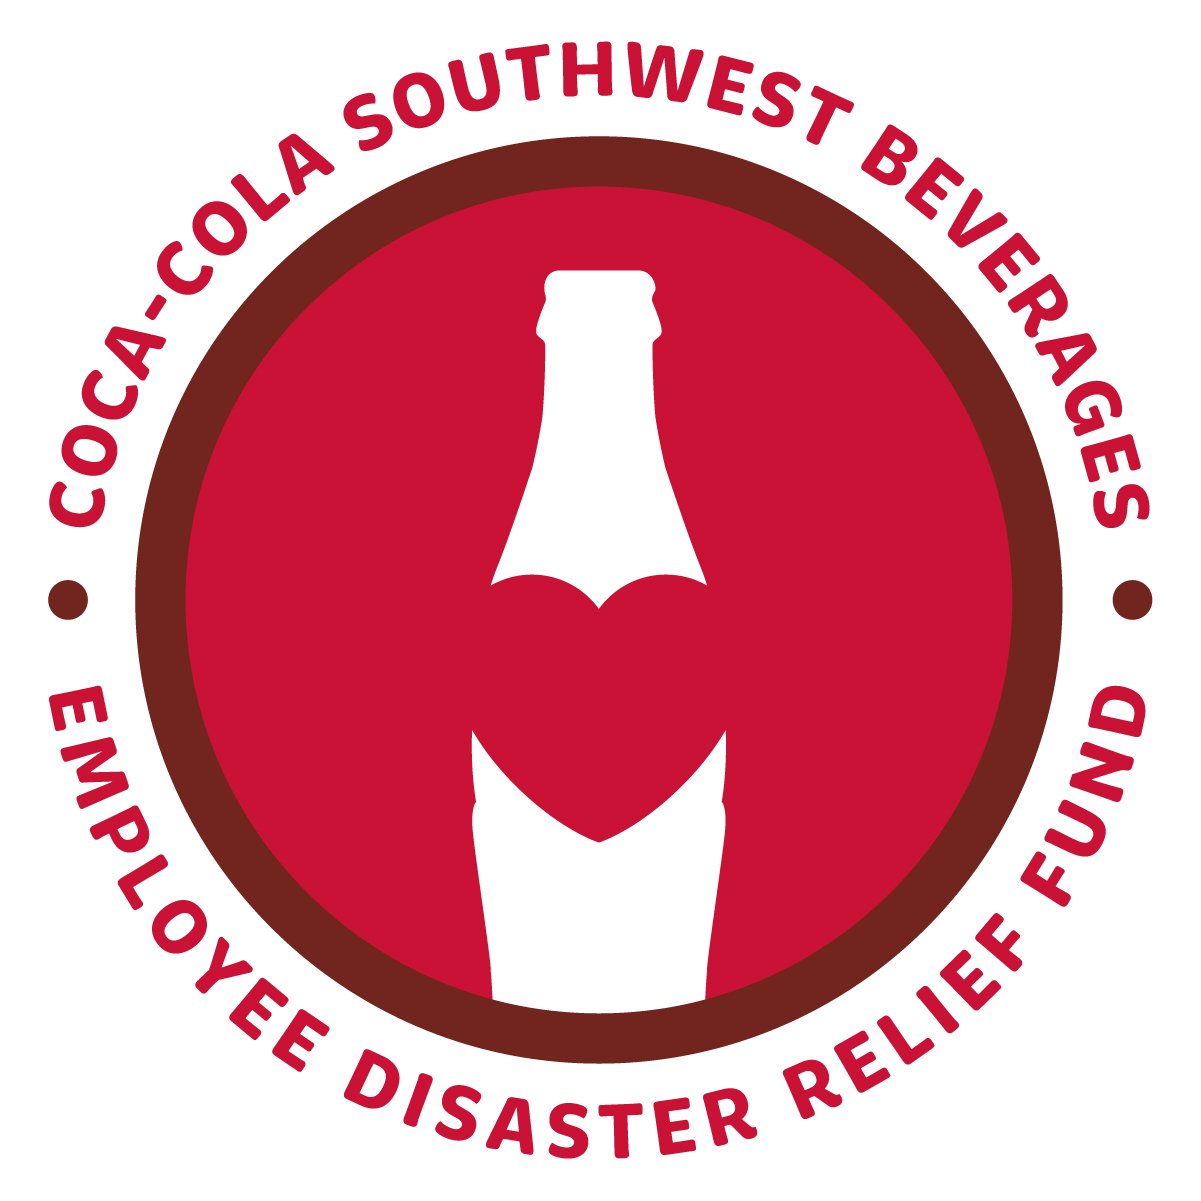 CCSWB Disaster Relief CocaCola Southwest Beverages